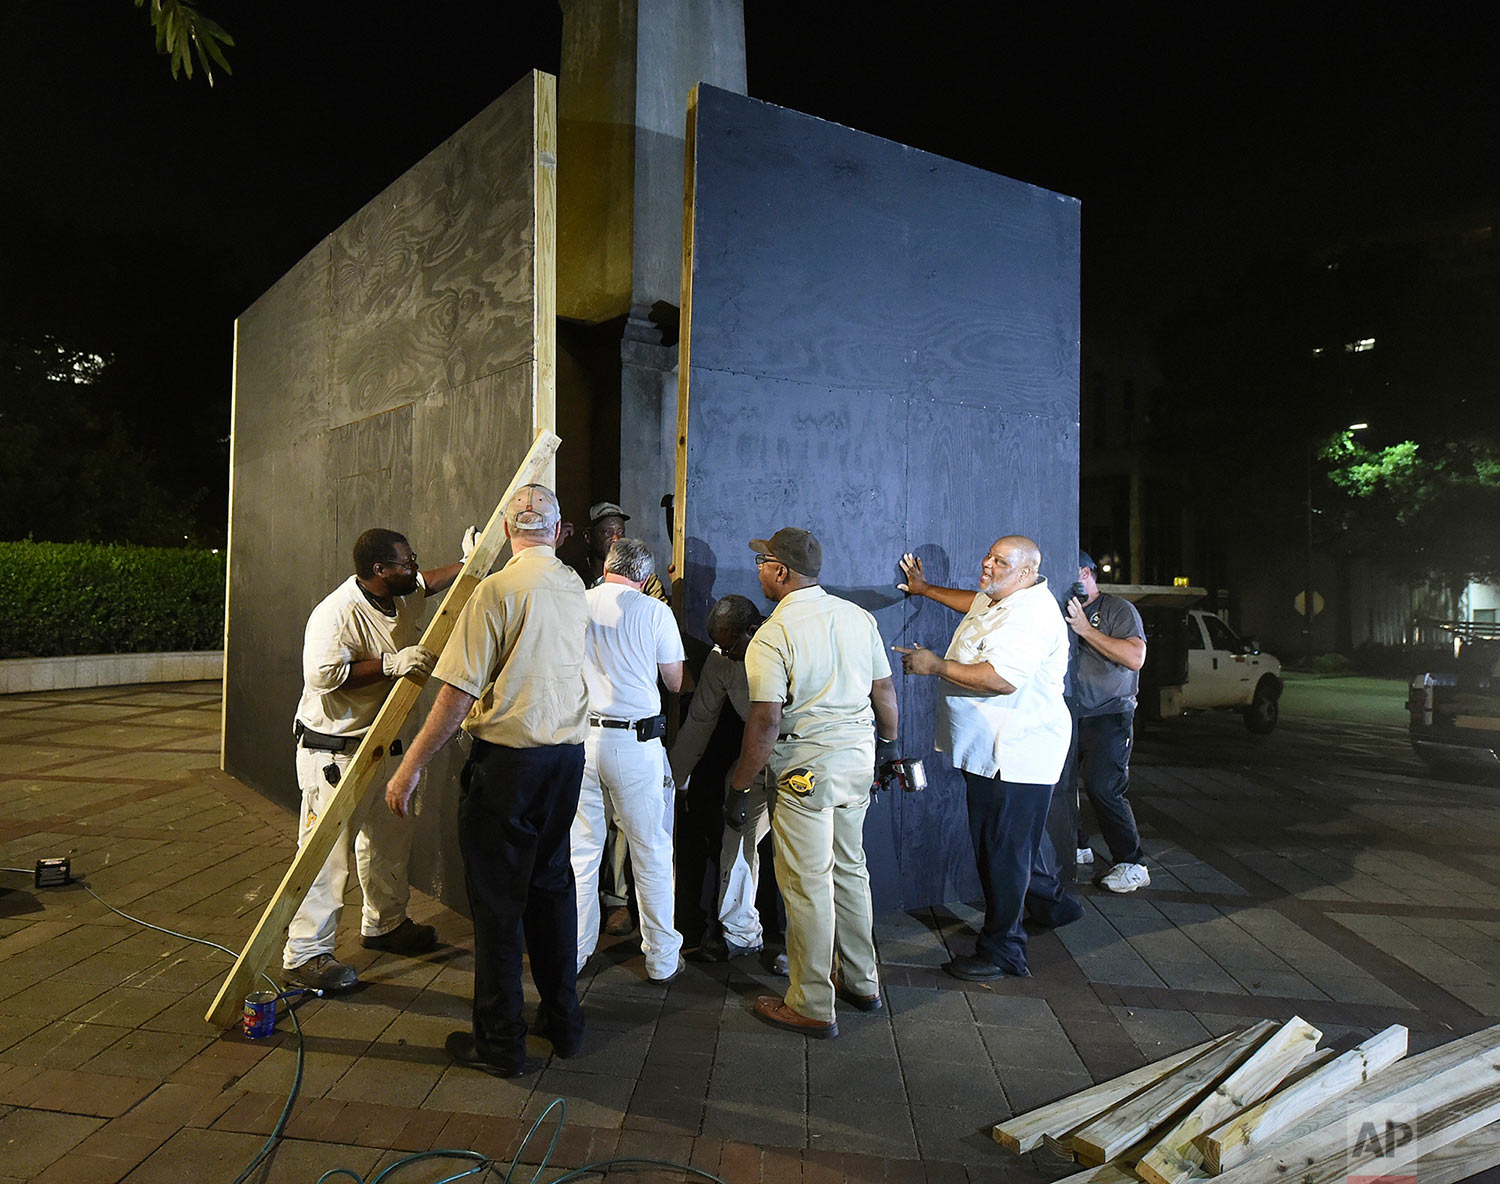  Birmingham city workers use plywood panels to cover the Confederate Monument in Linn Park, in Birmingham, Ala., Tuesday night, Aug. 15, 2017, on orders from Mayor William Bell. (Joe Songer  /AL.com via AP) 